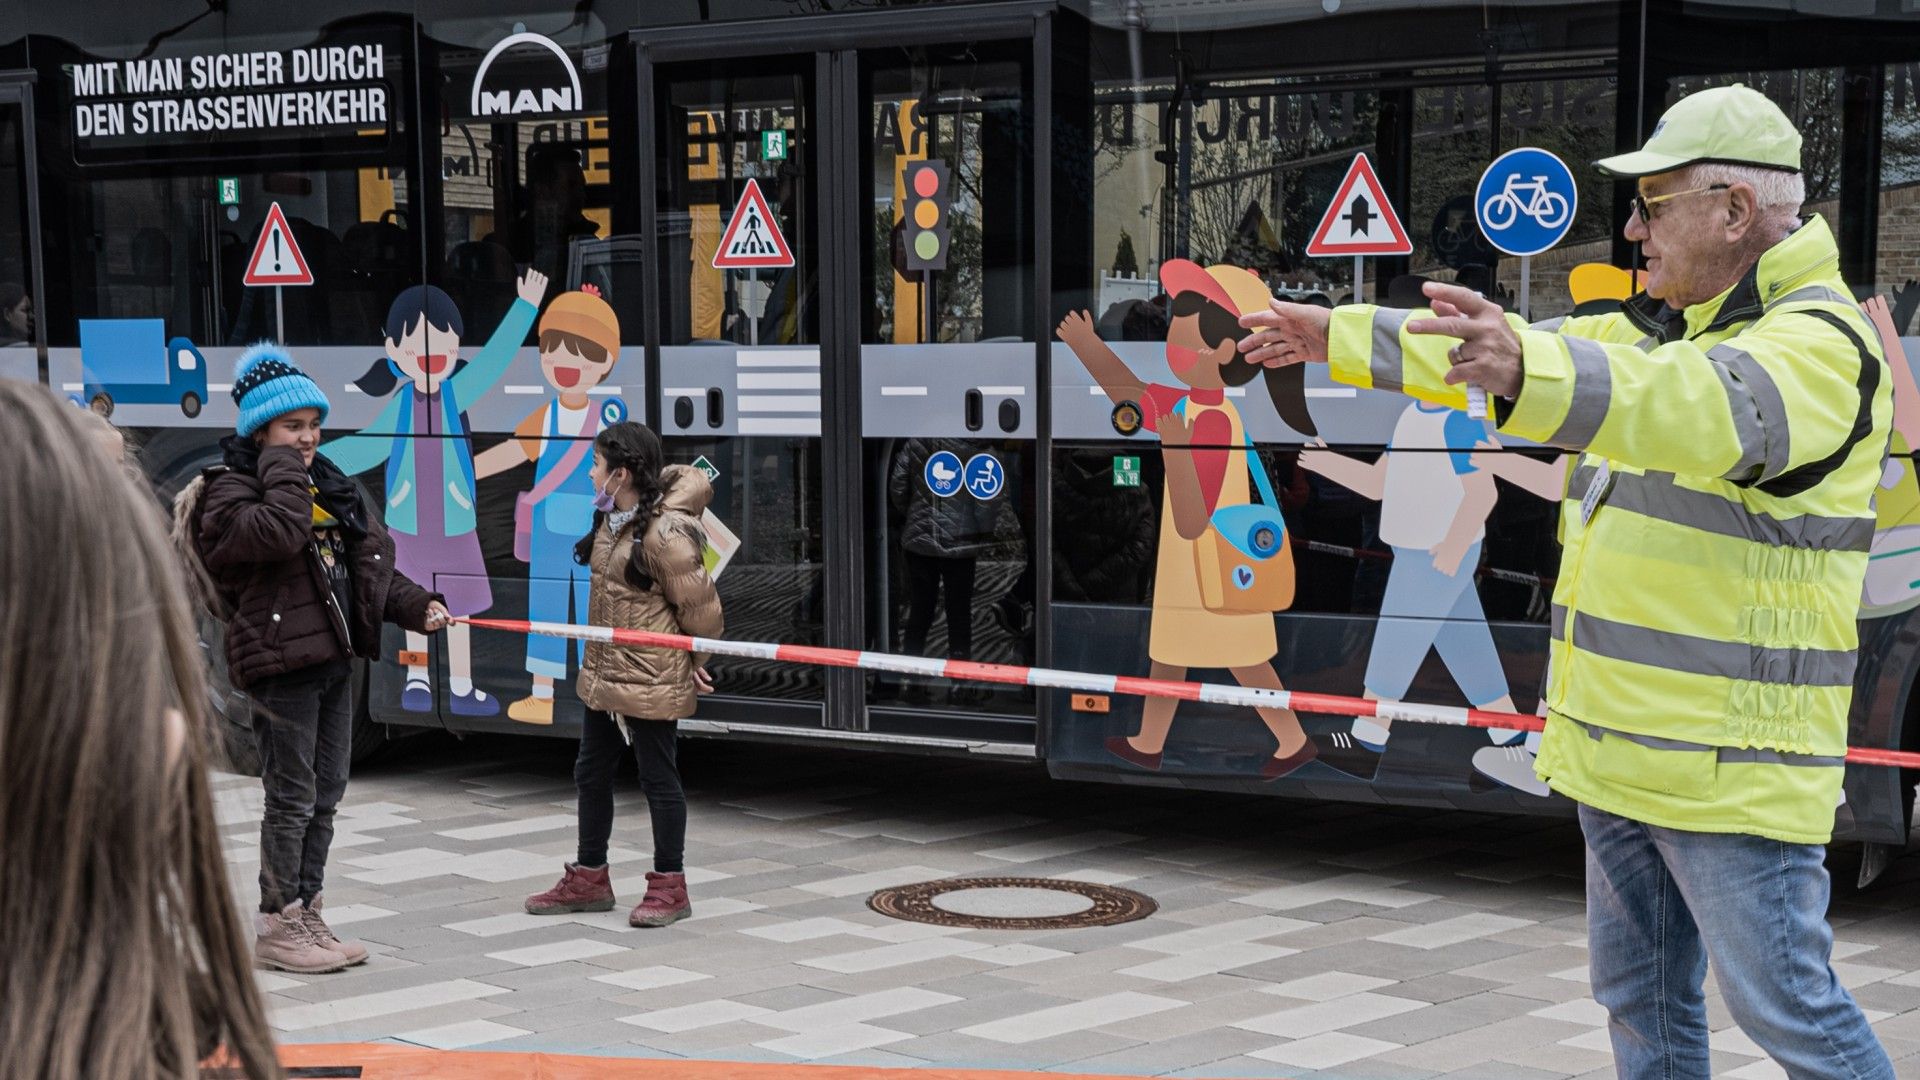 Safe way to school: Blind spot the focus of MAN's road safety campaign with 2,000 children